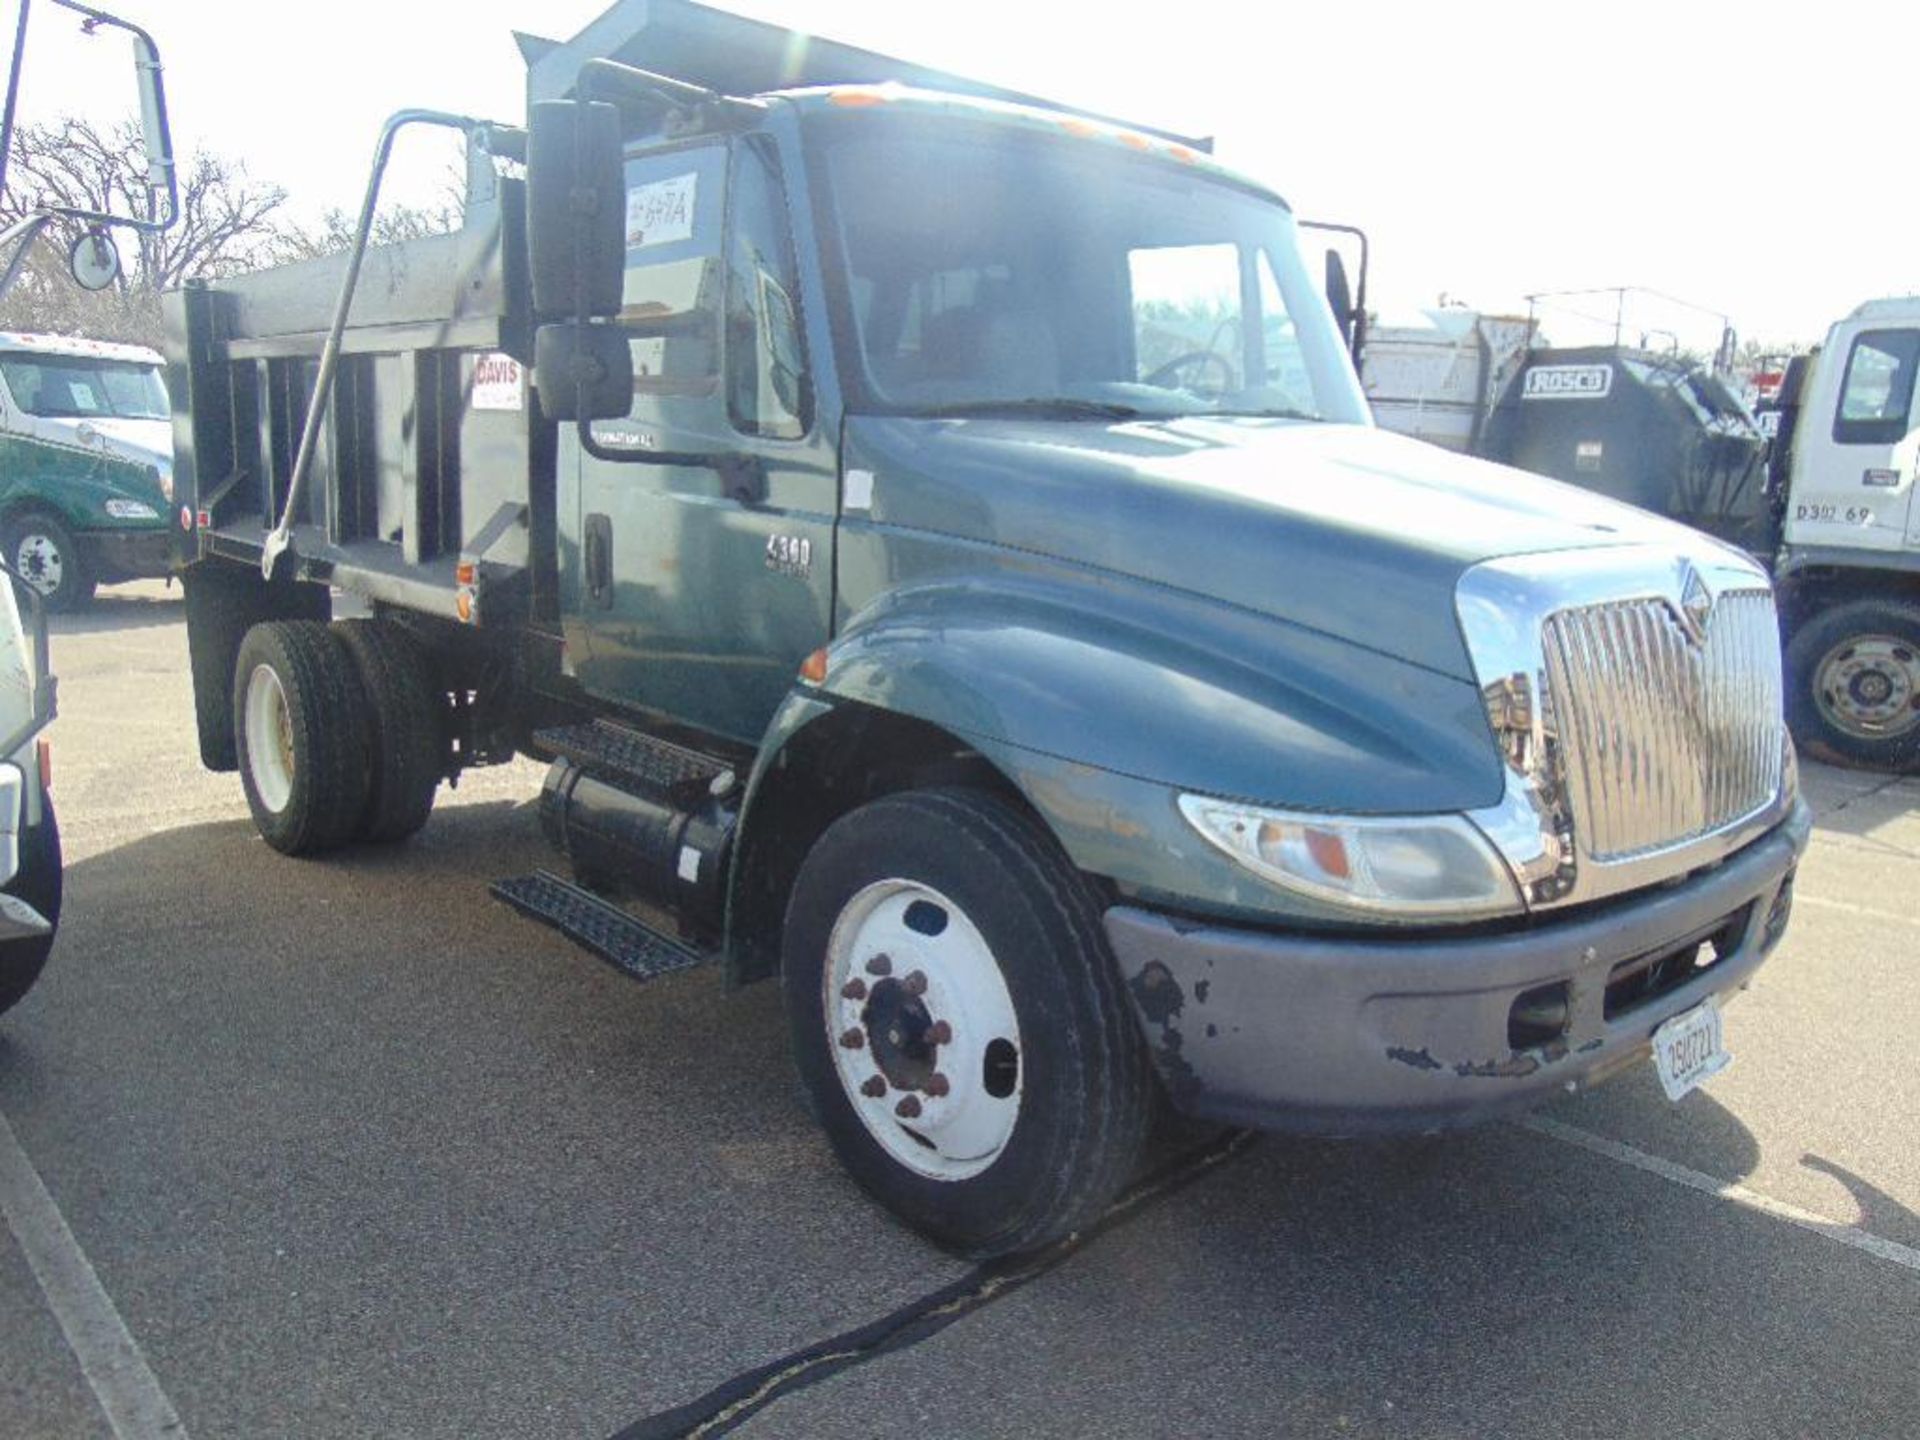 2006 IHC 4300 s/a Dump Truck s/n 1htmmaam07h453143, dt466 eng, auto trans, od reads 76237 miles, new - Image 6 of 10